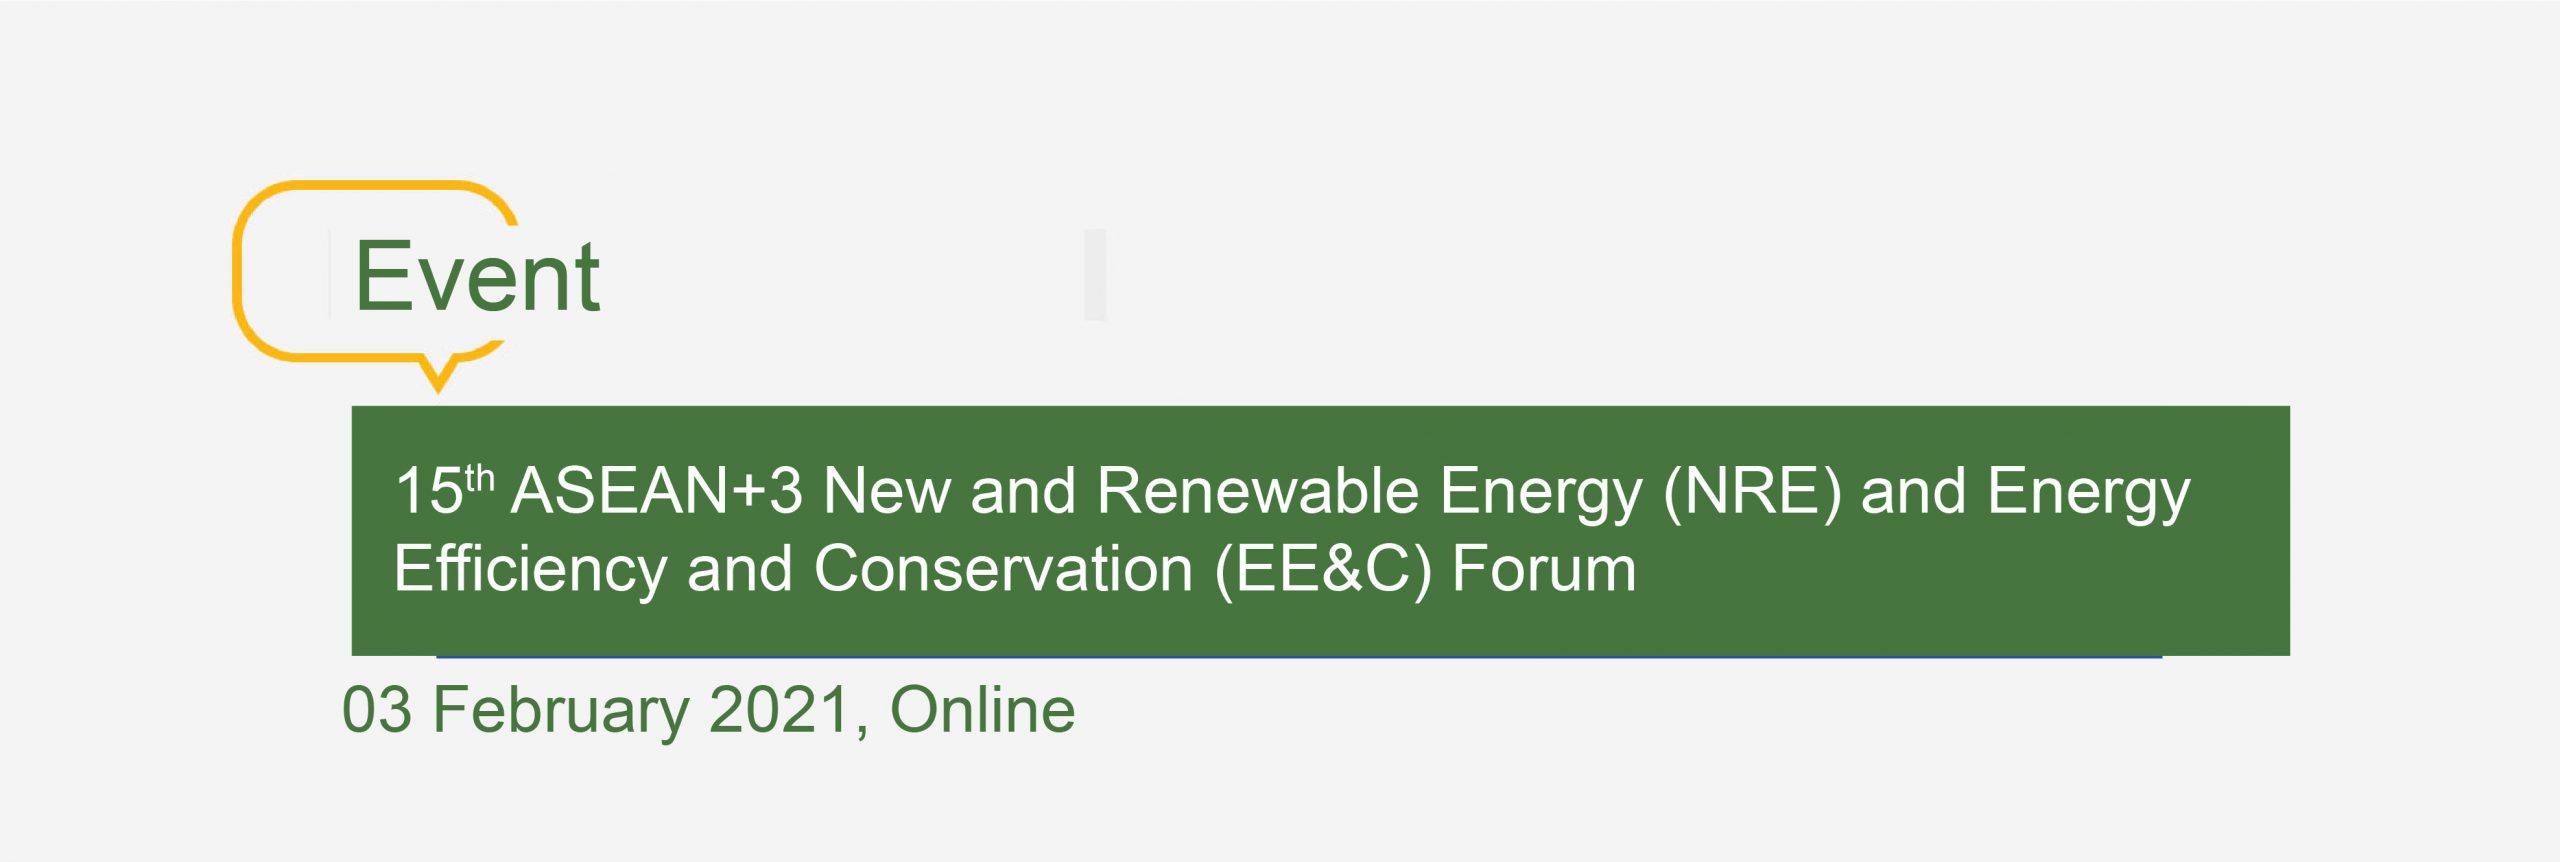 The 15th ASEAN+3 New and Renewable Energy (NRE) and Energy Efficiency and Conservation (EE&C) Forum